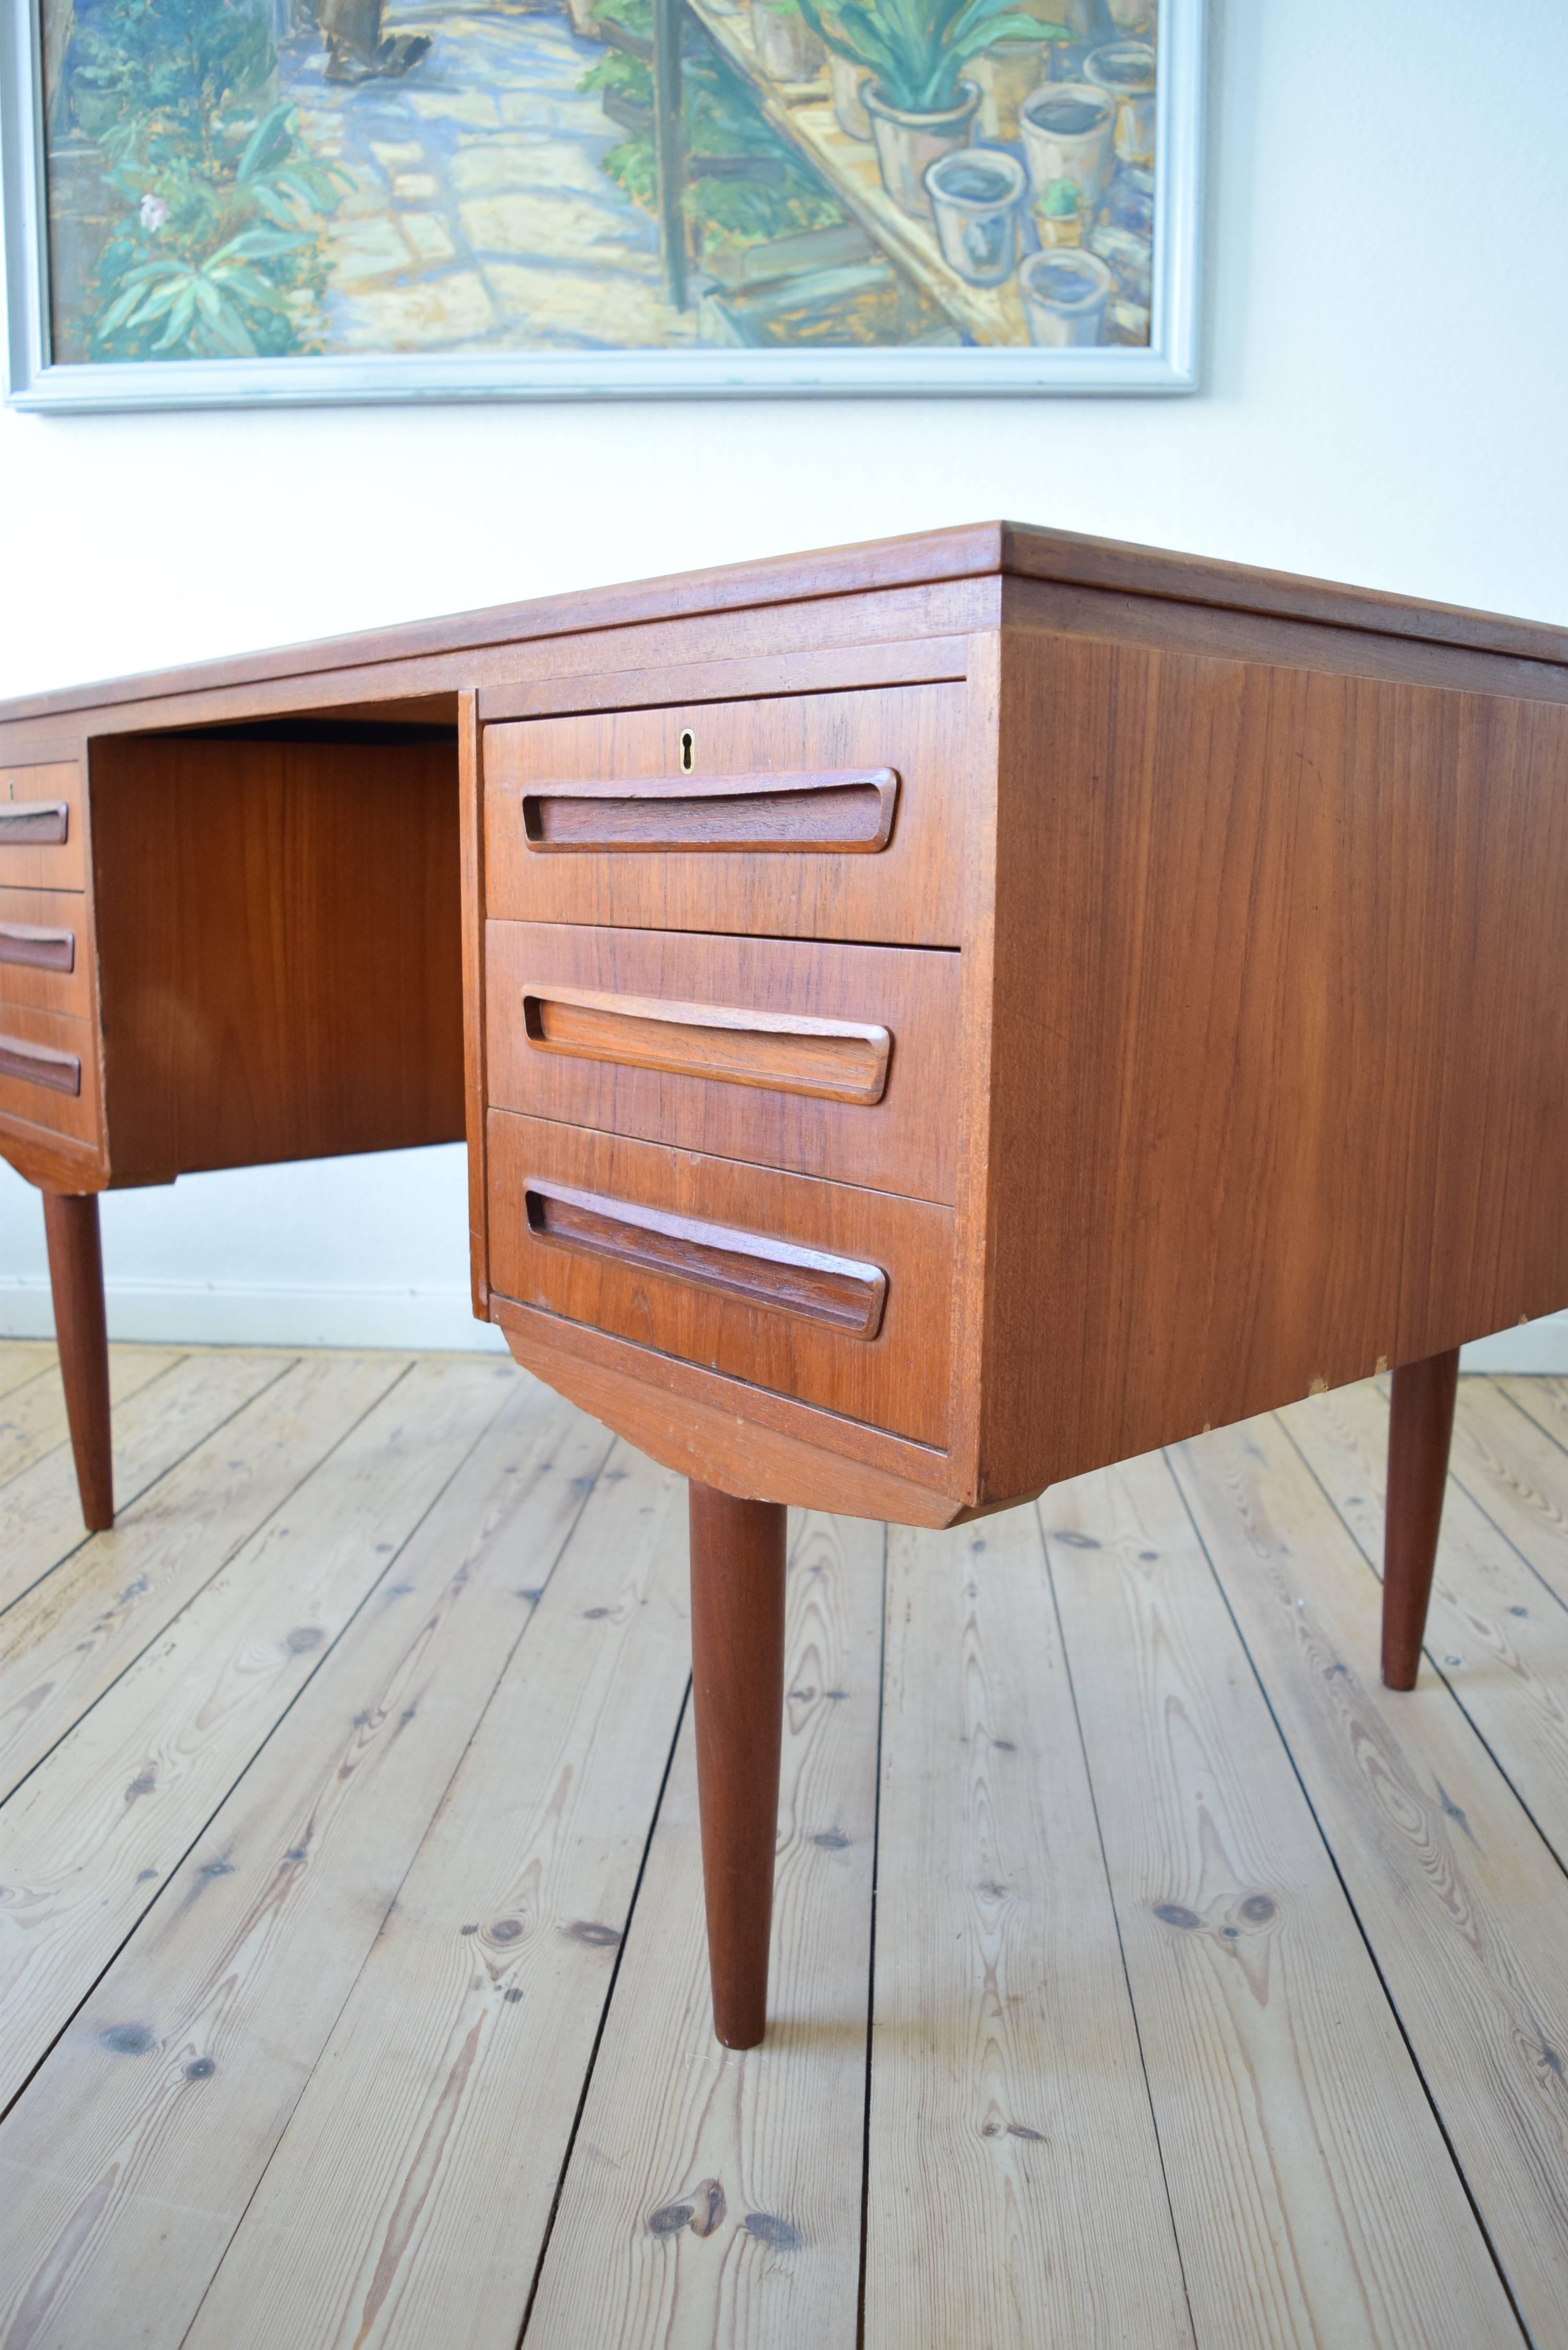 Teak desk designed by J. Svenstrup for A.P. Møbler, Denmark in the 1960s. Desk features six drawers (two lockable) on the front, and bar cabinet on the back side. Sits on turned and tapered solid teak legs. Apart from some marks on the top plate